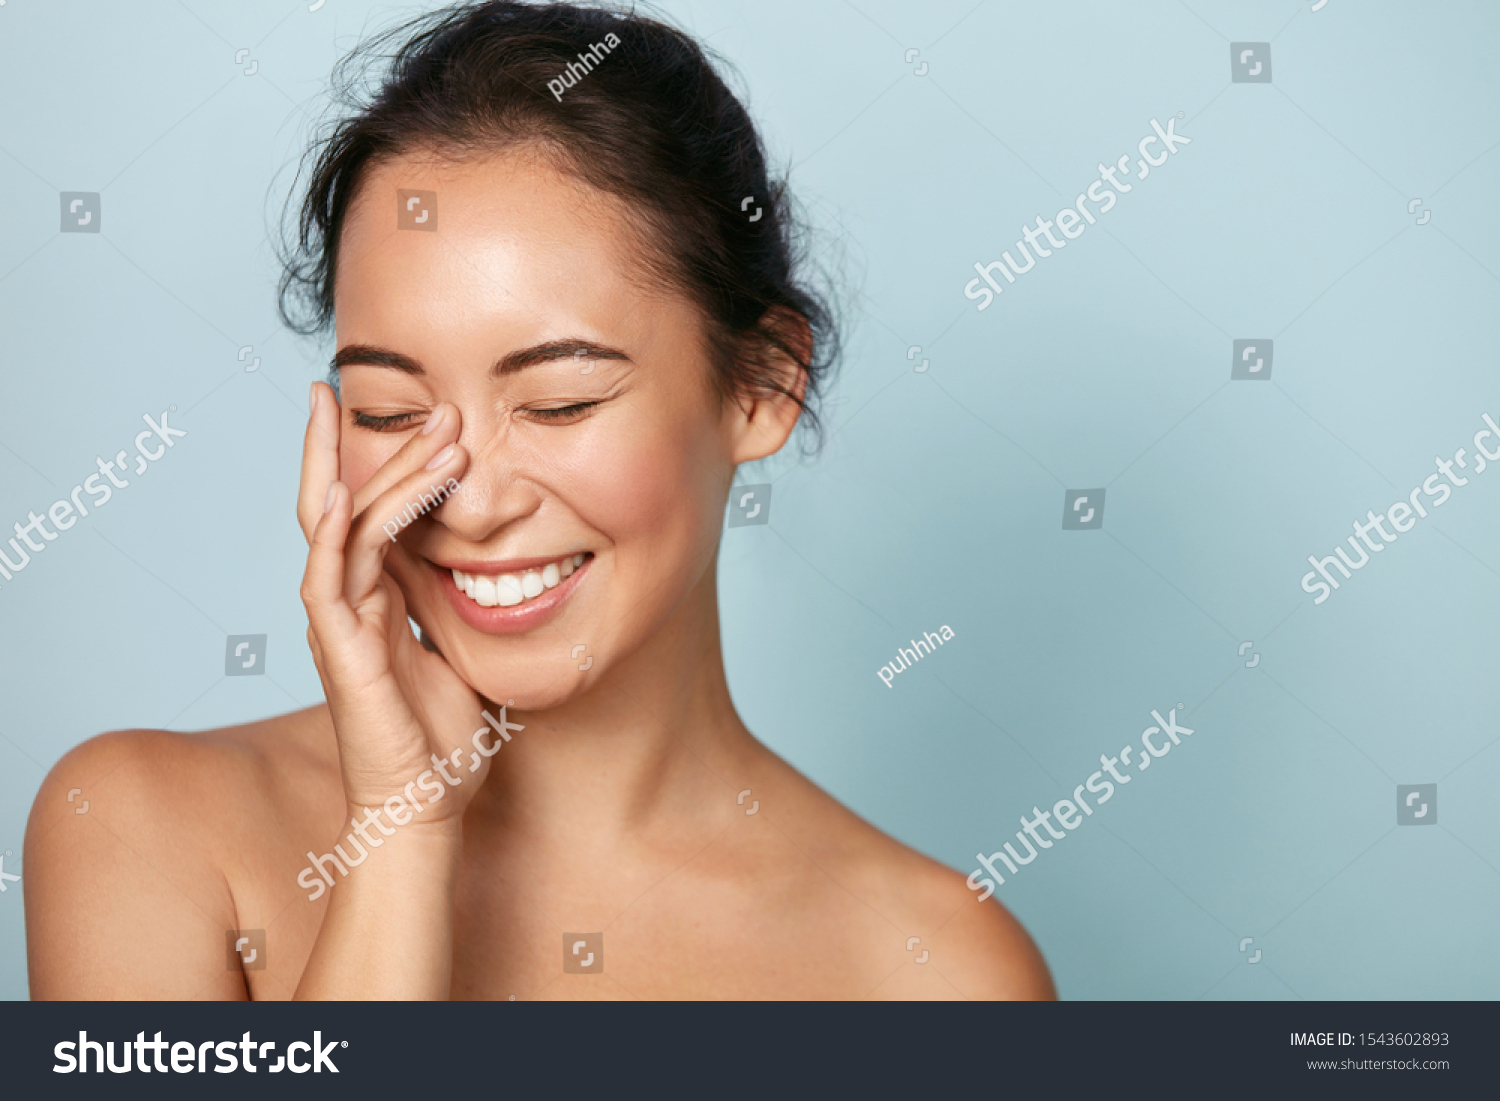 Beauty face. Smiling asian woman touching healthy skin portrait. Beautiful happy girl model with fresh glowing hydrated facial skin and natural makeup on blue background at studio. Skin care concept #1543602893